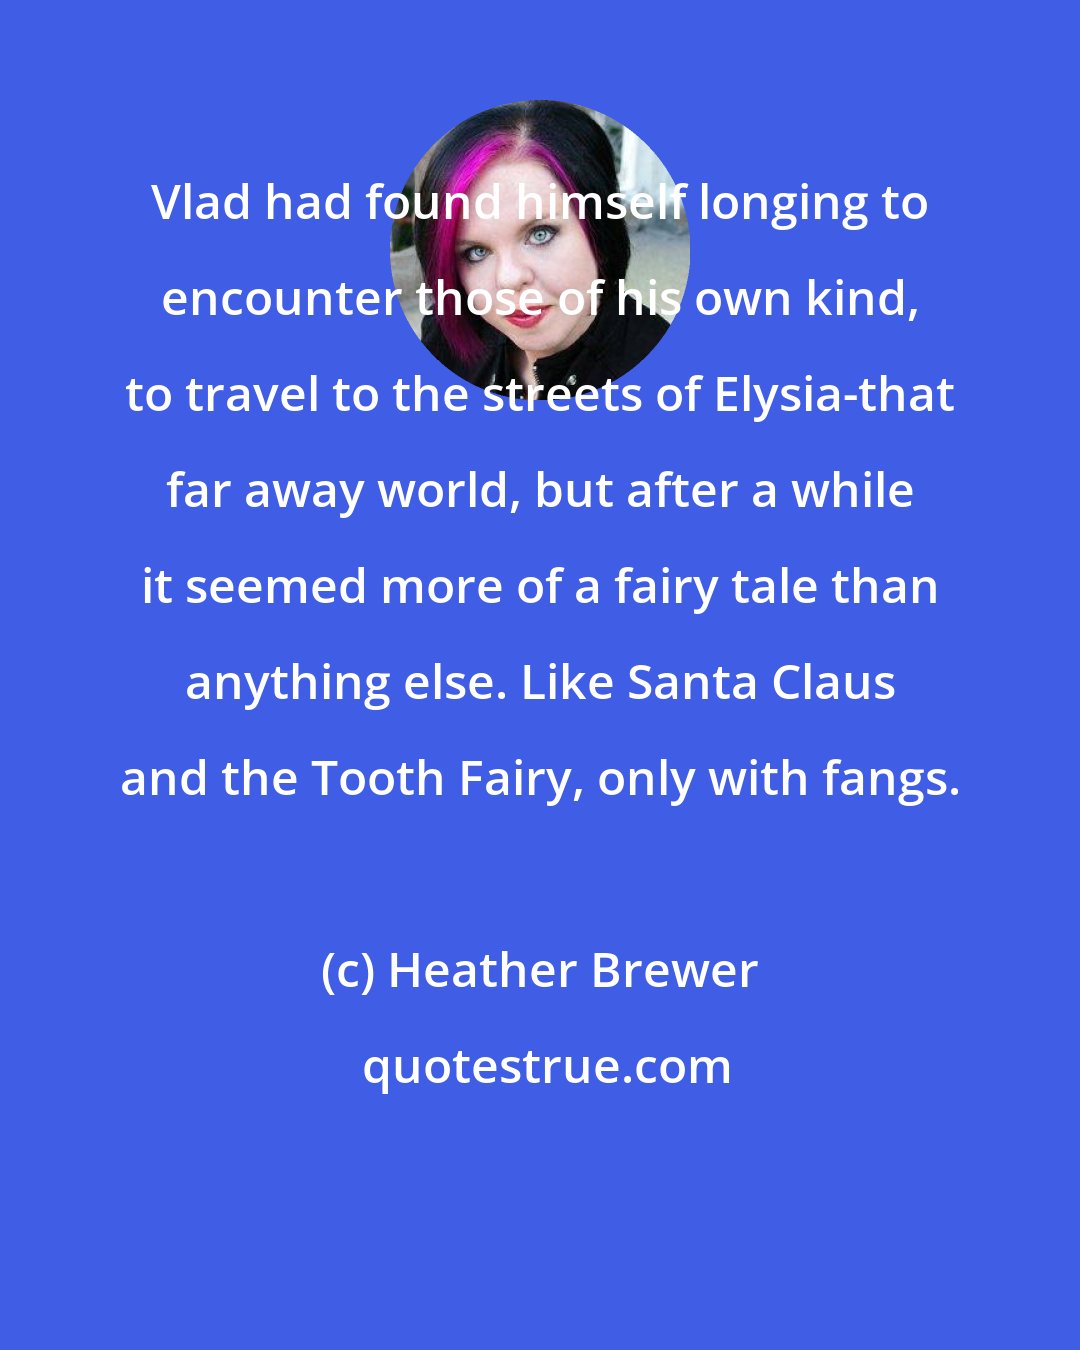 Heather Brewer: Vlad had found himself longing to encounter those of his own kind, to travel to the streets of Elysia-that far away world, but after a while it seemed more of a fairy tale than anything else. Like Santa Claus and the Tooth Fairy, only with fangs.